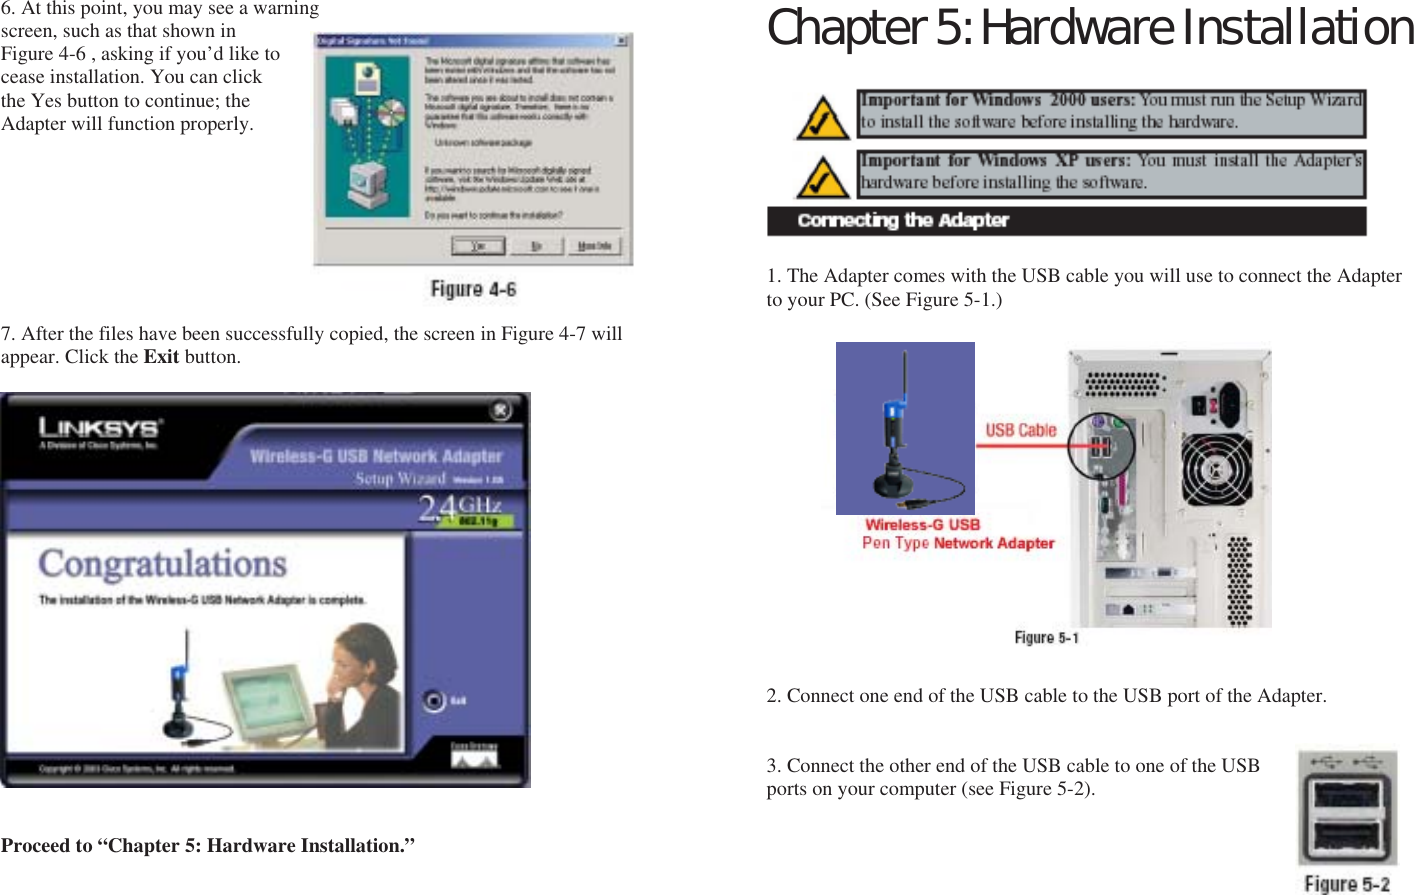 6. At this point, you may see a warning screen, such as that shown in Figure 4-6 , asking if you’d like to cease installation. You can click the Yes button to continue; the Adapter will function properly.         7. After the files have been successfully copied, the screen in Figure 4-7 will appear. Click the Exit button.                     Proceed to “Chapter 5: Hardware Installation.”      Chapter 5: Hardware Installation          1. The Adapter comes with the USB cable you will use to connect the Adapter to your PC. (See Figure 5-1.)                 2. Connect one end of the USB cable to the USB port of the Adapter.   3. Connect the other end of the USB cable to one of the USB ports on your computer (see Figure 5-2). Adapter      